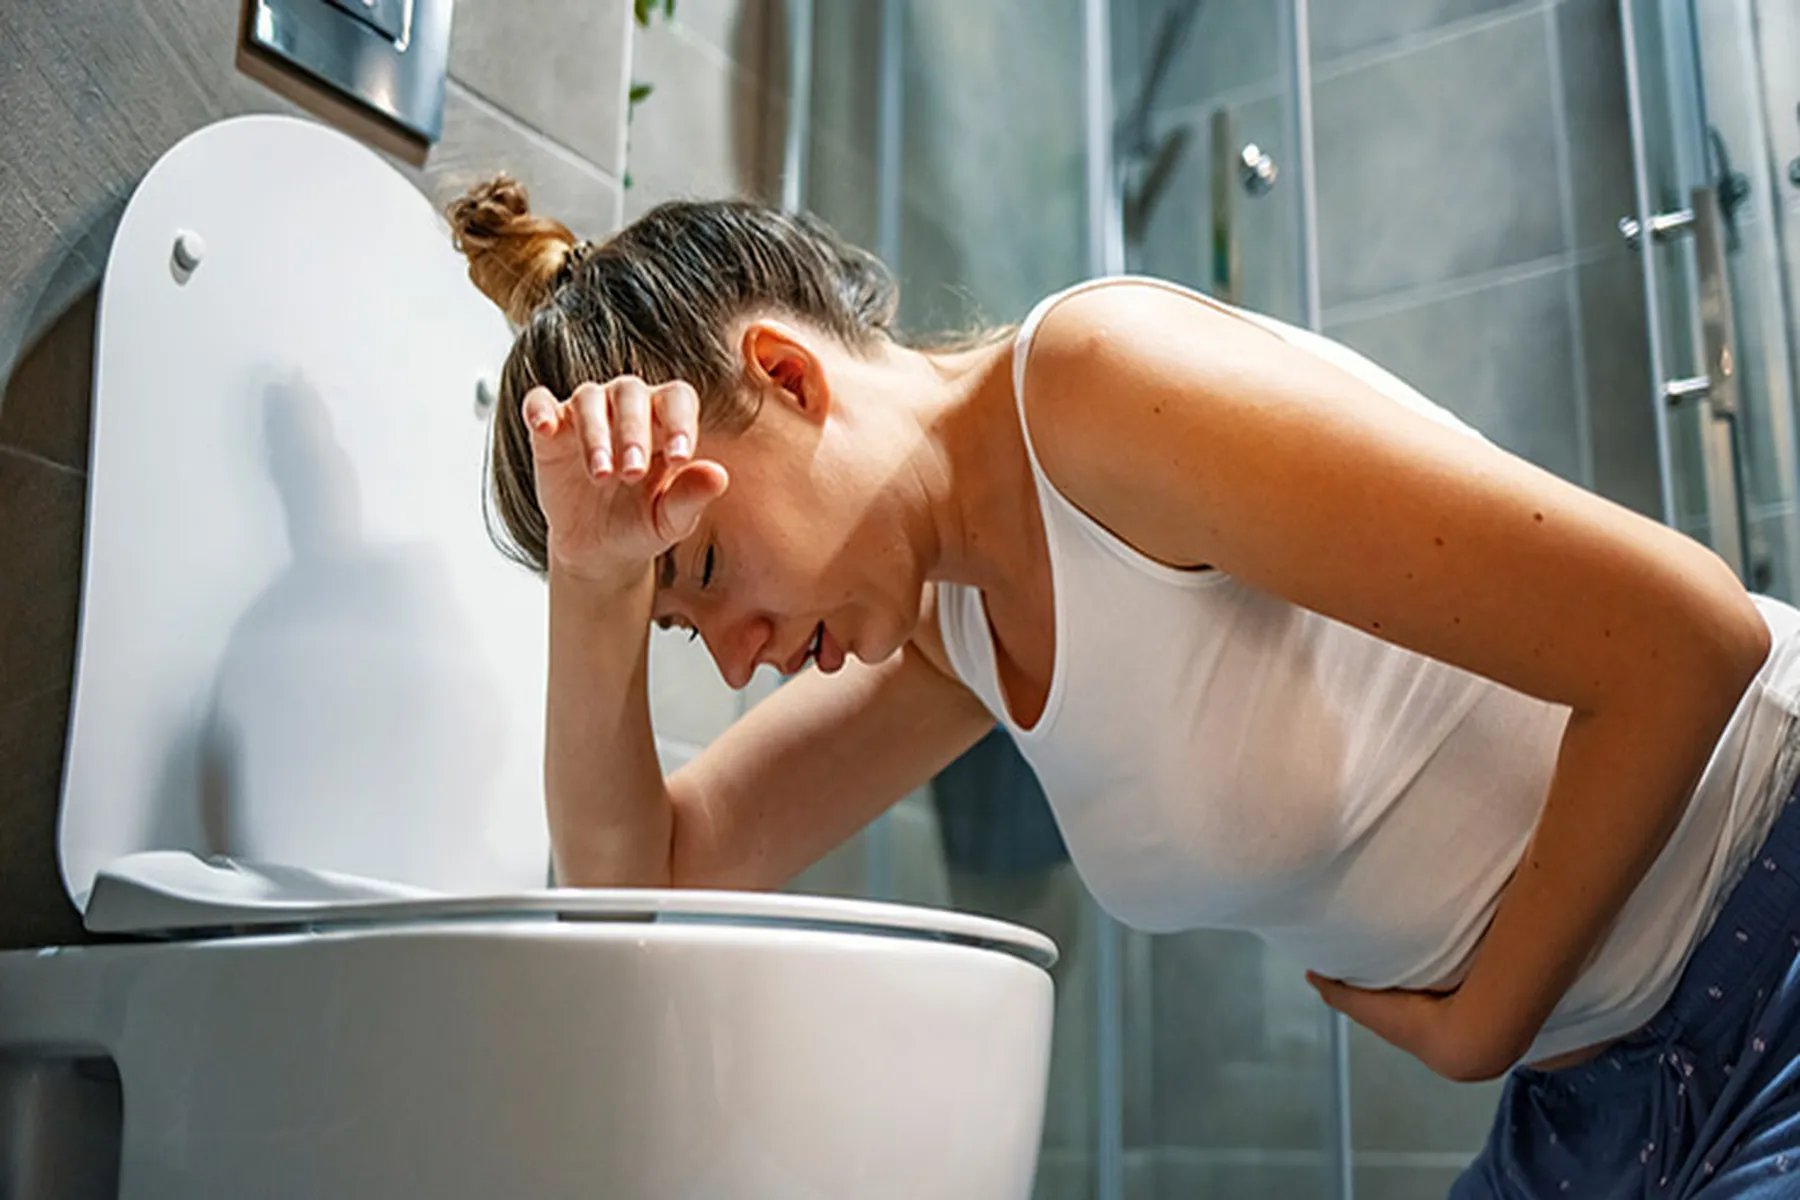 A woman leans over a toilet, about to vomit.